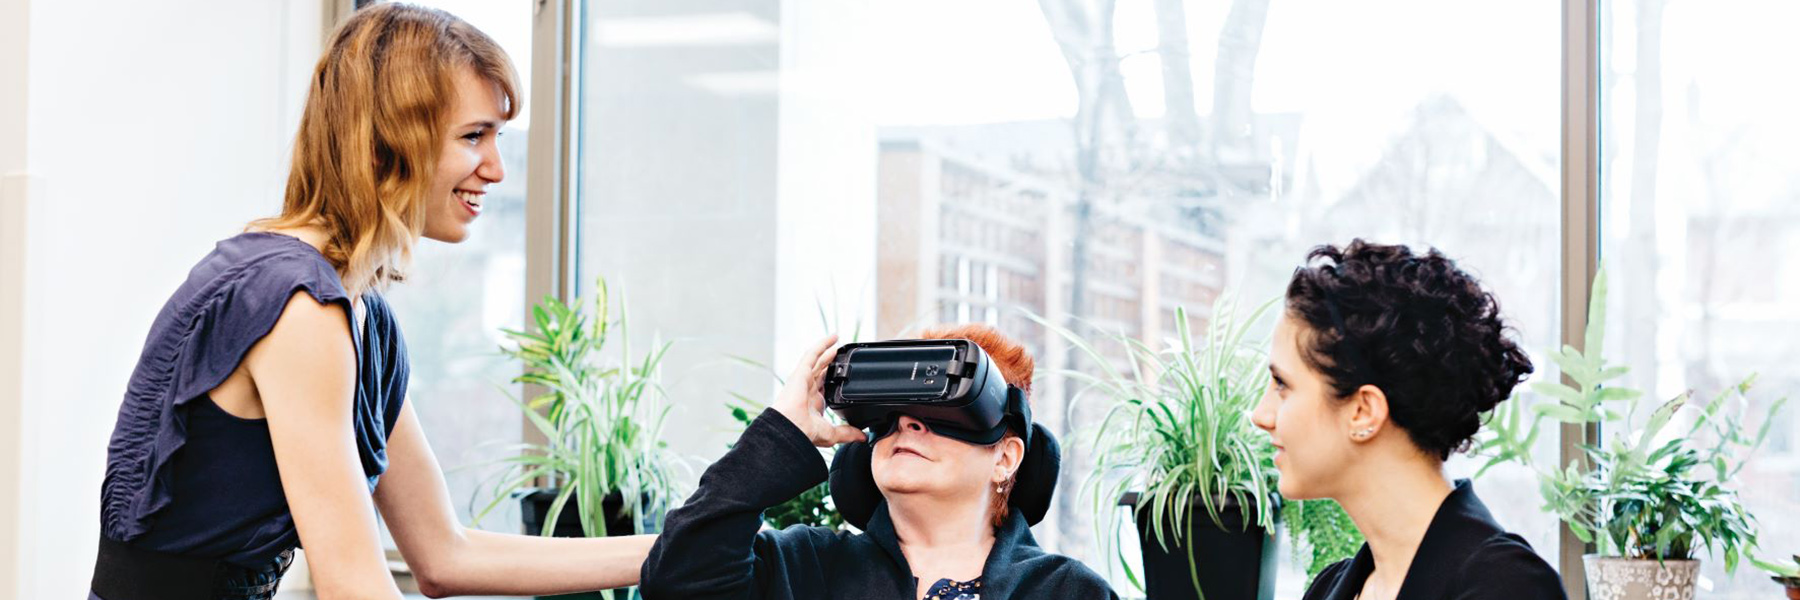 Virtual reality therapy promotes wellness for adults living with Alzheimer’s and dementia